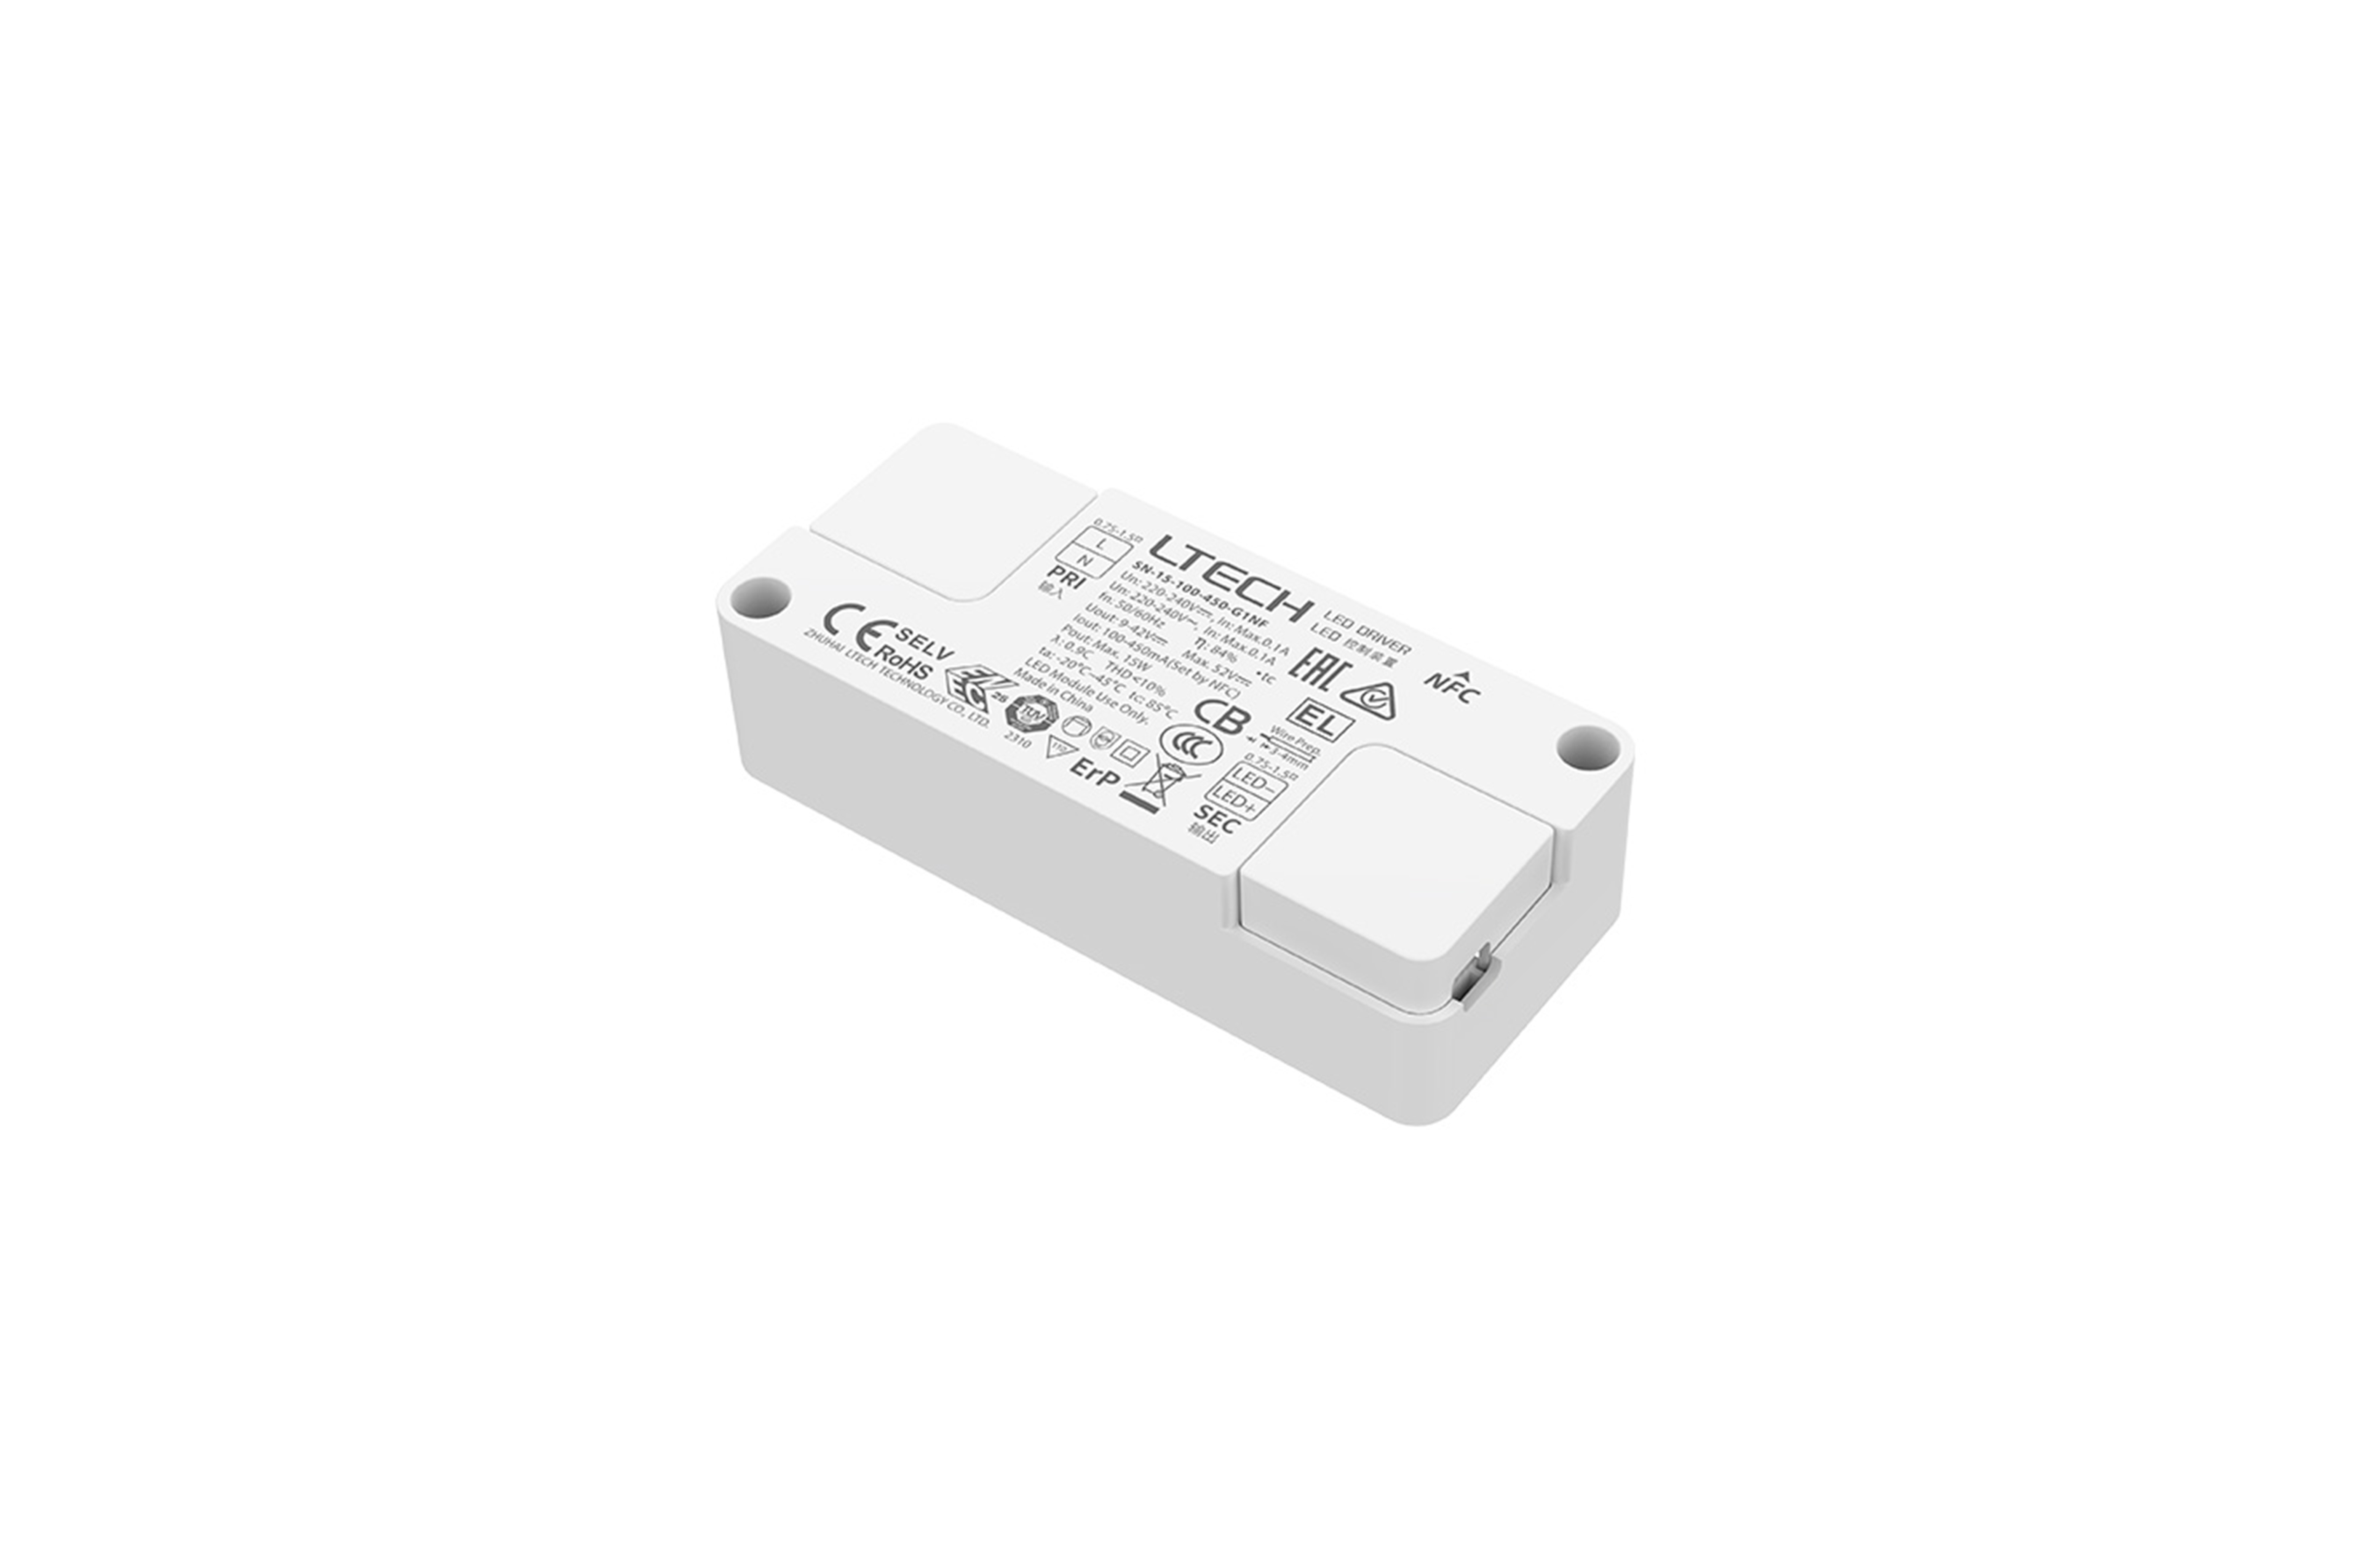 SN-15-100-450-G1NF  Intelligent Constant Current NFC ON/OFF LED Driver; 15W 100-450mA ;9-42Vdc ; 200-240Vac; Out put Range.0.9W-15W; IP20; 5yrs Warrenty.